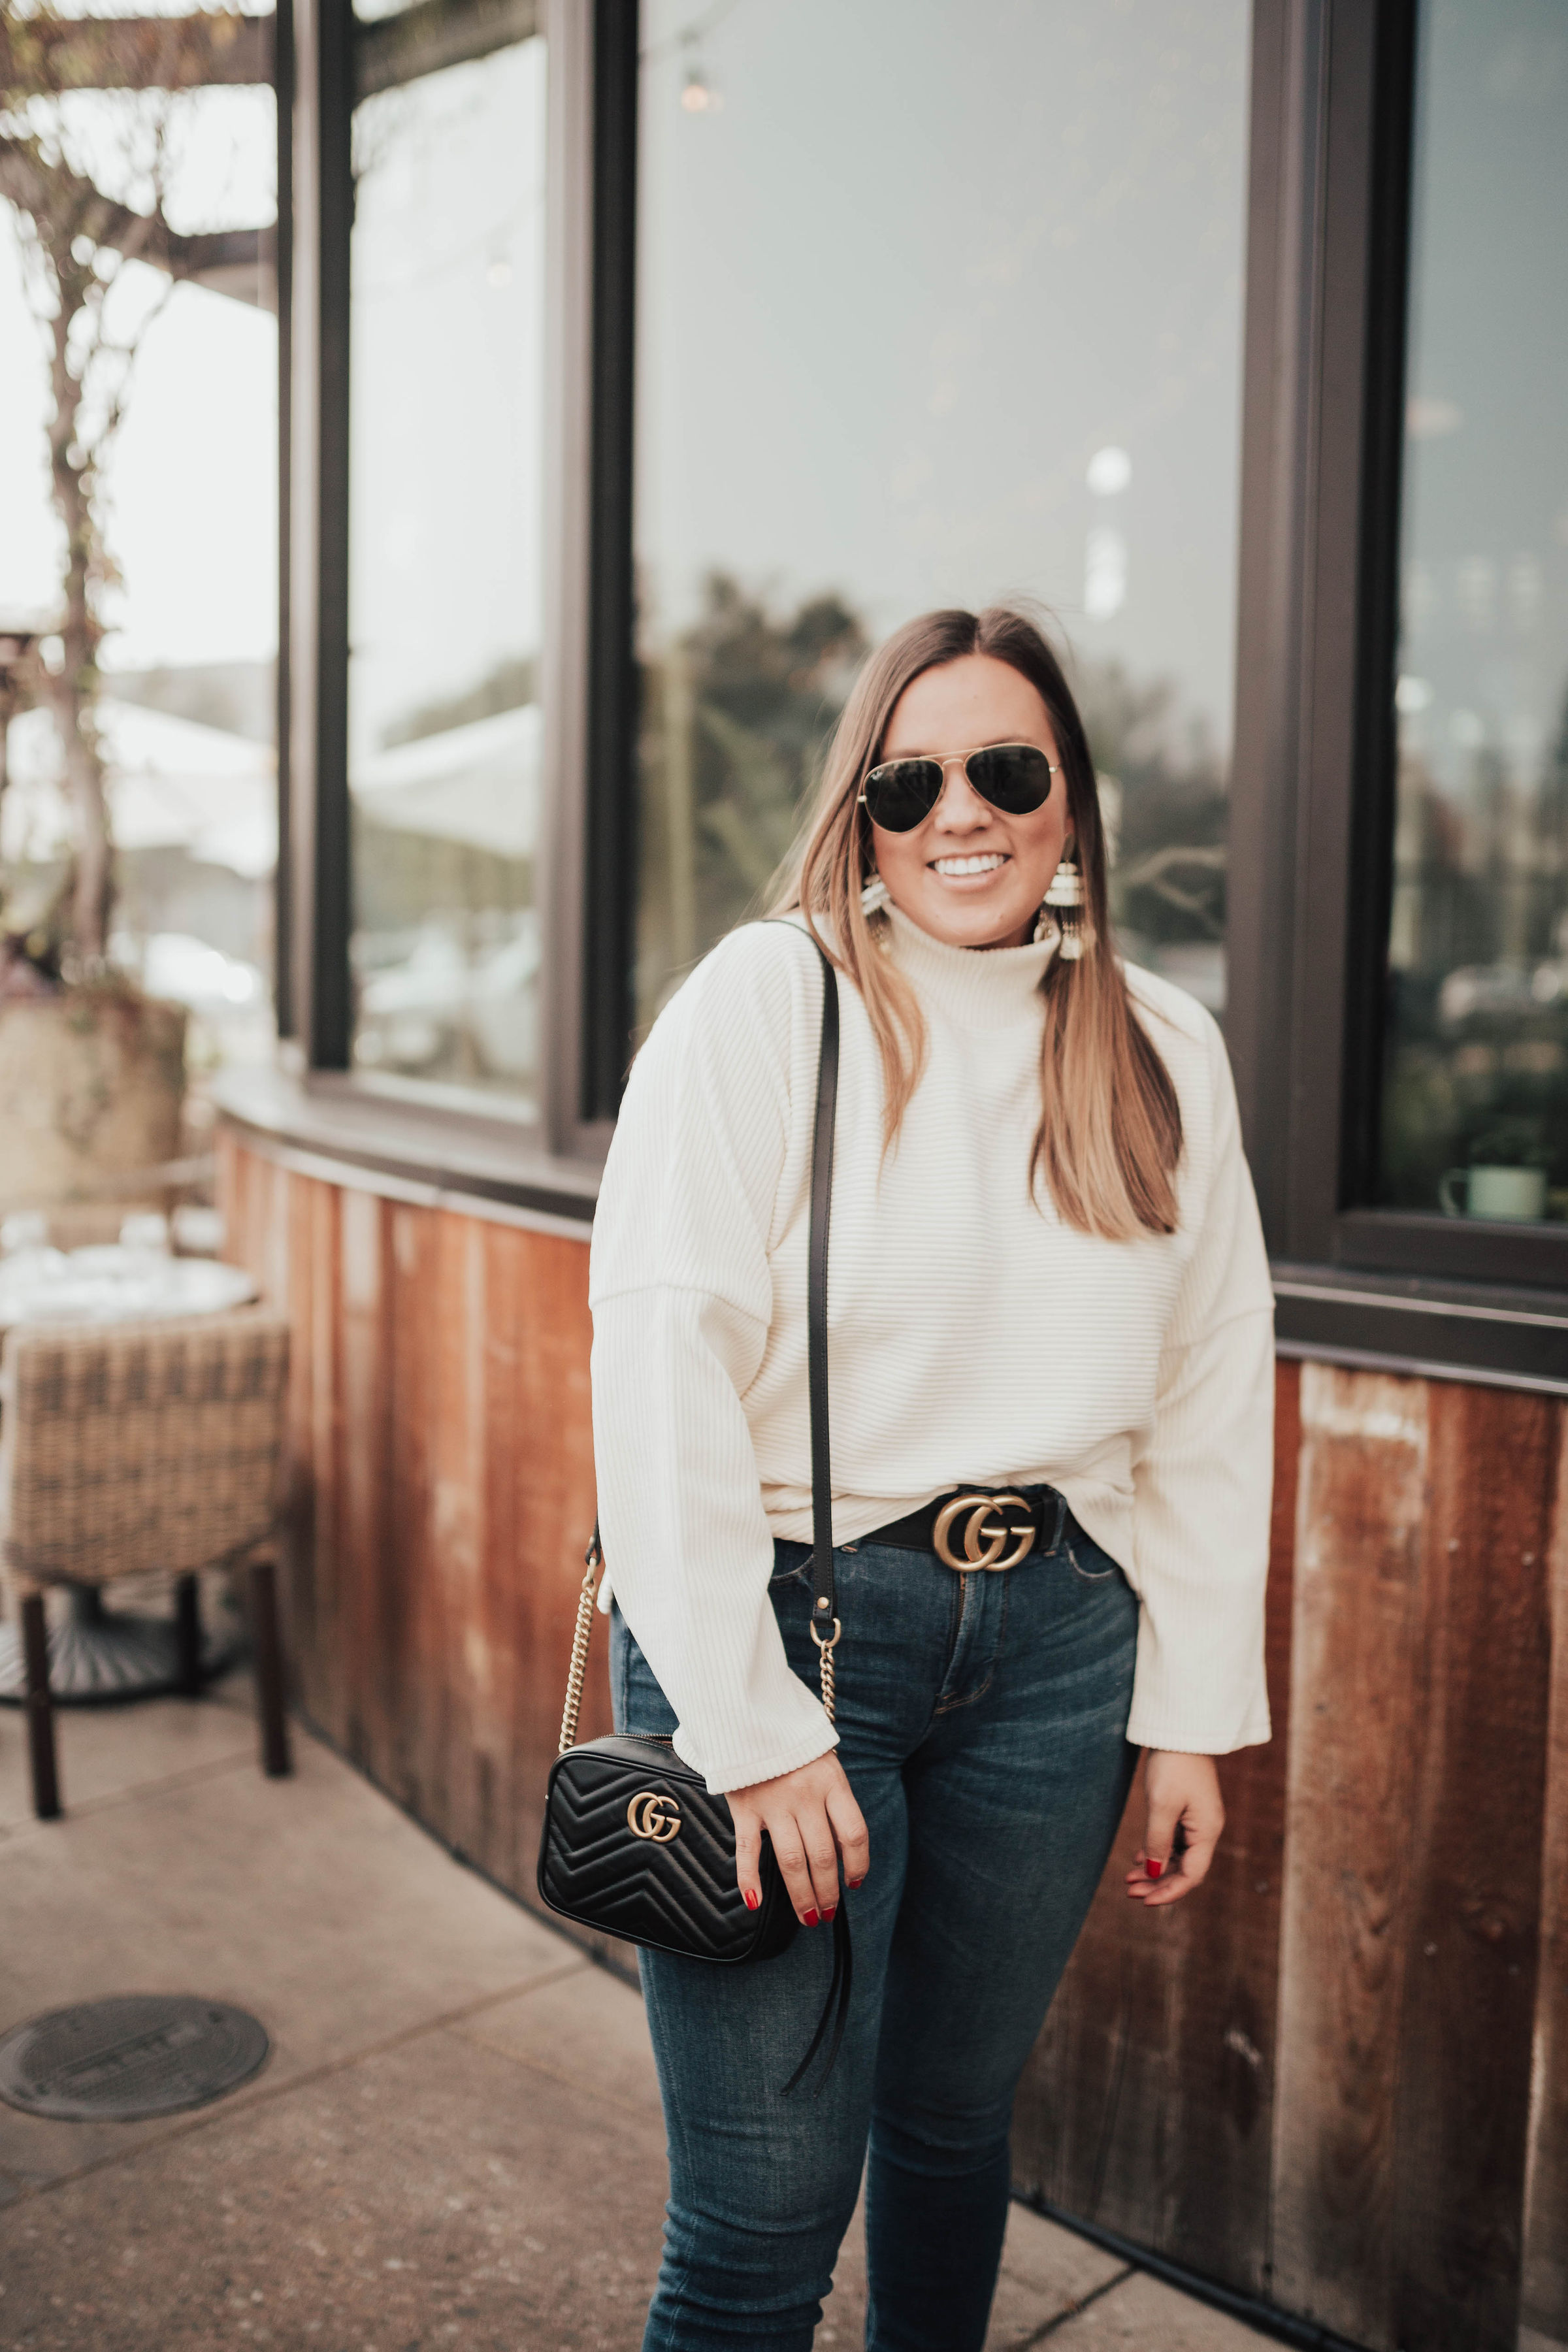 San Francisco bloggers Ashley Zeal and Emily Wieczorek share their November Top Ten Sellers featuring all the top-selling products that you guys have been buying!